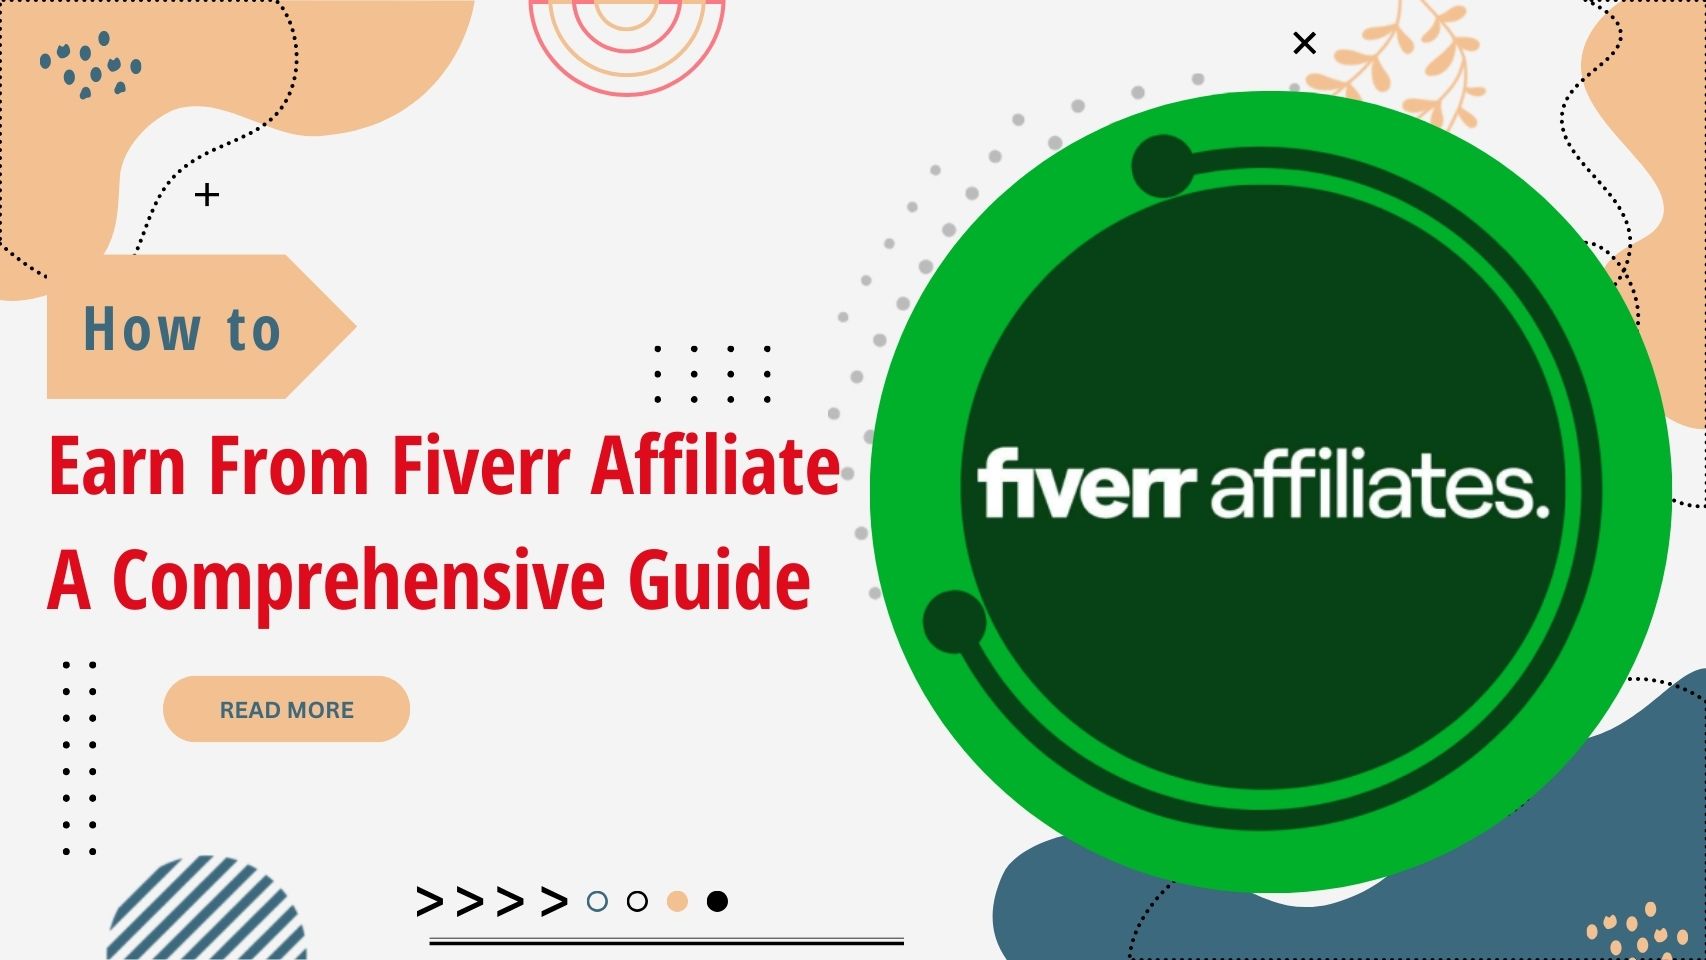 How to Earn From Fiverr Affiliate: A Comprehensive Guide